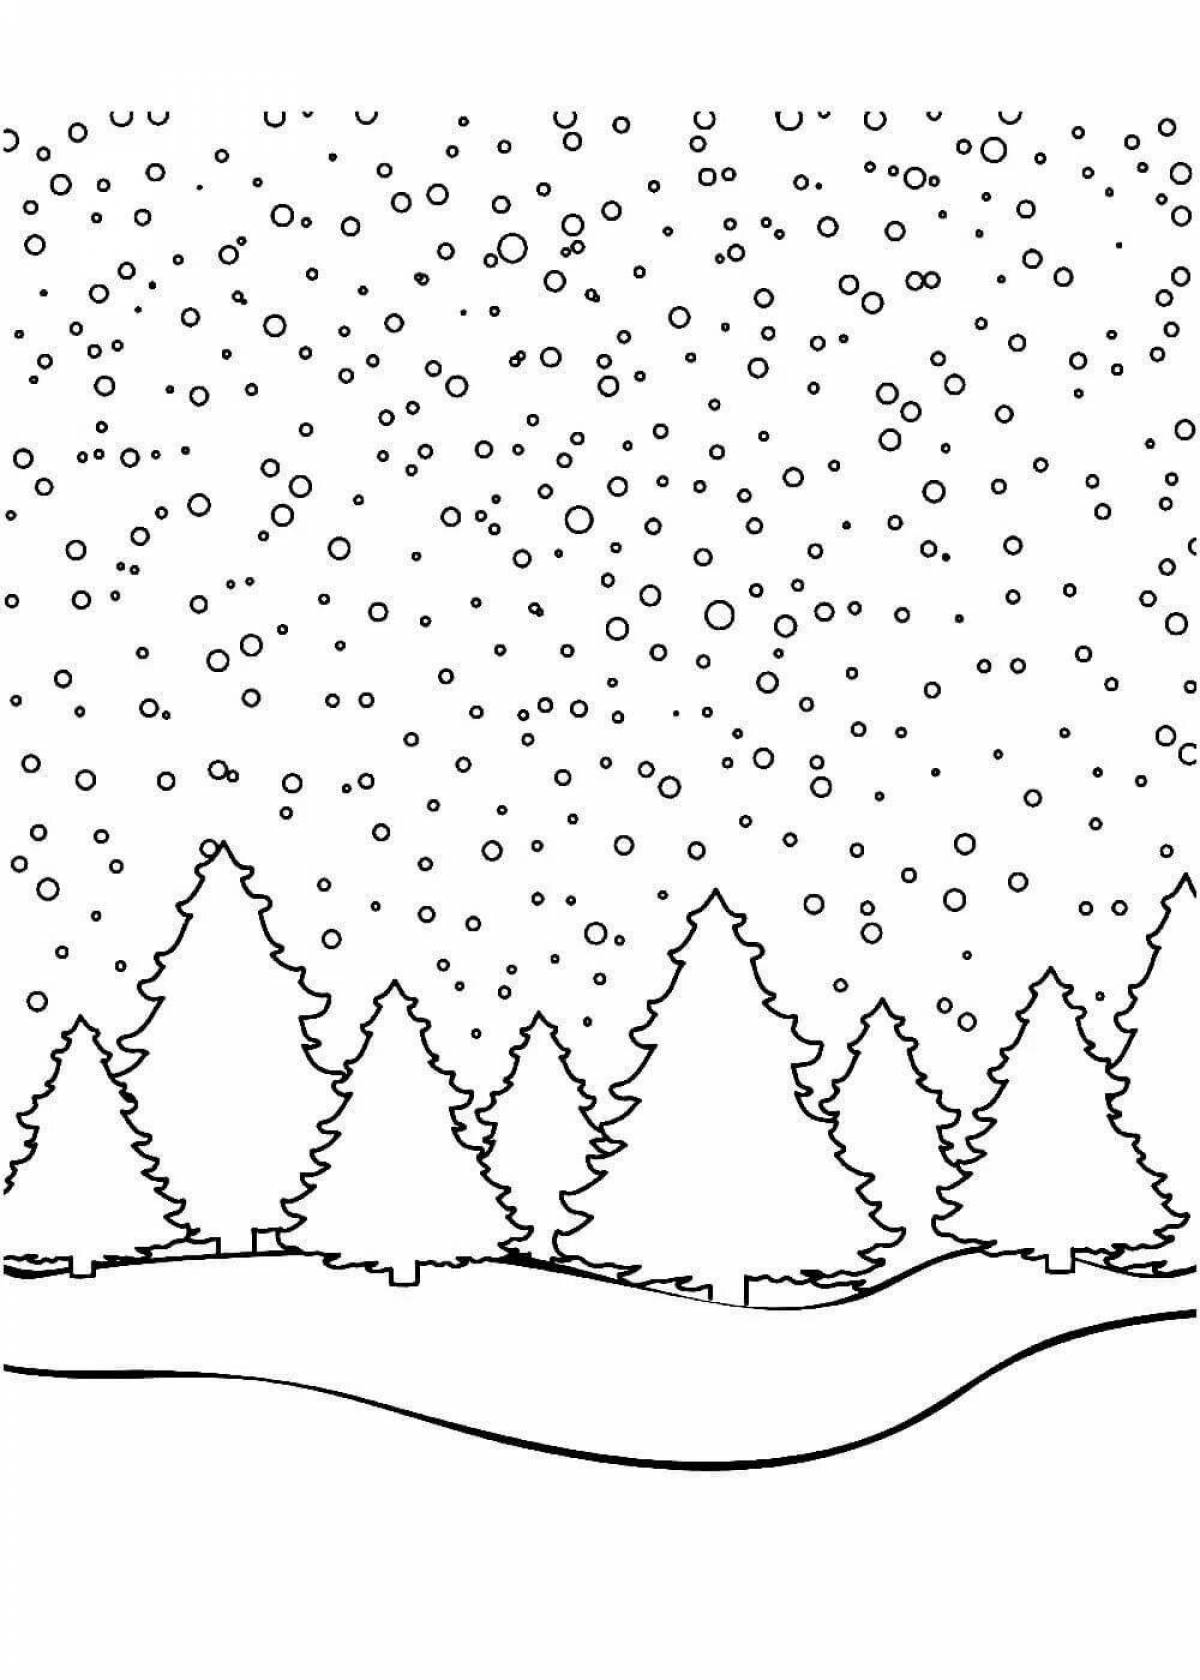 Glorious blizzard coloring page